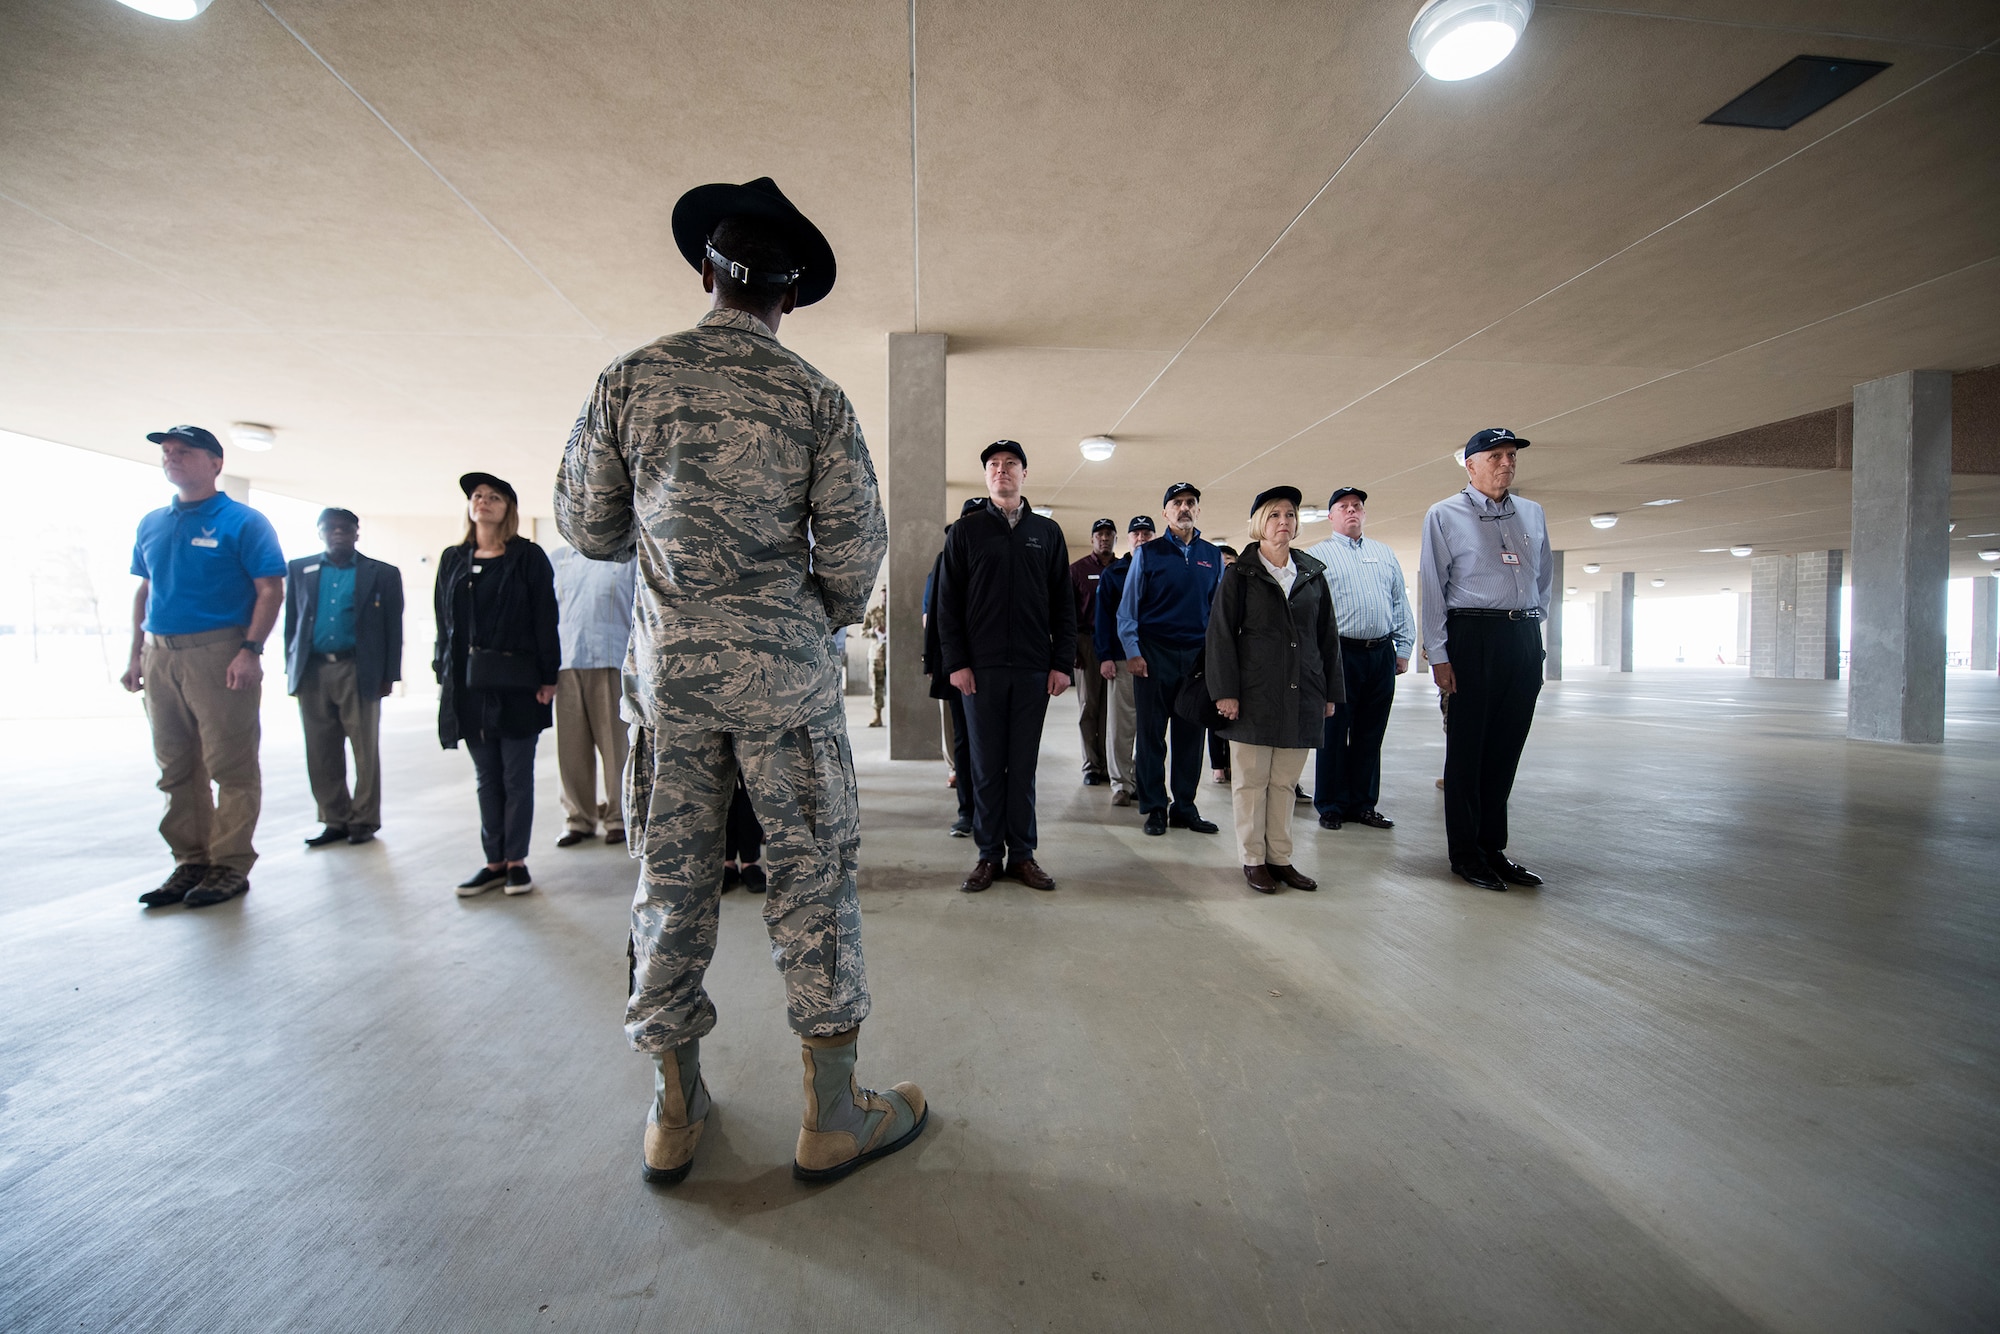 Civic leaders were surprised during the Airmen Training Center tour as U.S. Air Force Tech. Sgt. Lewis Christopher (center), 319th Training Squadron, military training instructor, orders them to get in formation for a crash course on marching, facing movements, and dormitory life, Nov. 7, 2019, at Joint Base San Antonio-Lackland, Texas. During the visit, civic leaders toured missions of 37th Training Wing, 12th Flying Training Wing, 502nd Air Base Wing and Air Force Recruiting Service, all at JBSA locations. The Air Force Civic Leader Program is an Air Staff-level program comprising major command-selected community leaders from a wide variety of industries and sectors, including banking and economic development, construction, manufacturing, education, healthcare, science and technology. The program helps community leaders understand and advocate for the Air Force’s diverse missions.